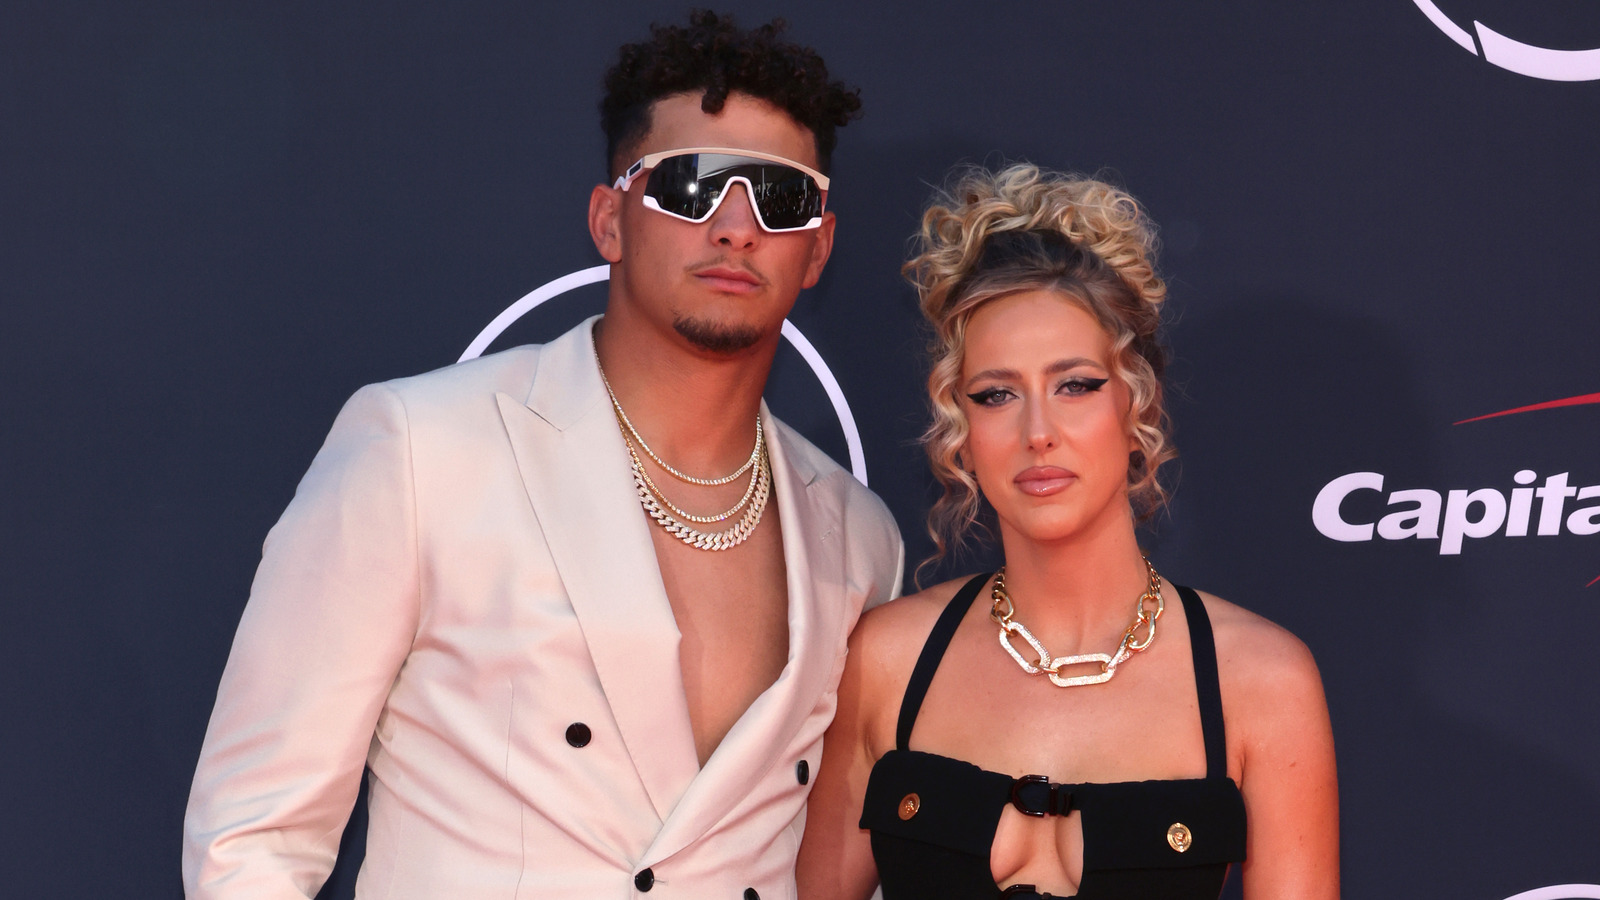 Patrick Mahomes, Wife Brittany on Tropical Vacation with Kids: Photos